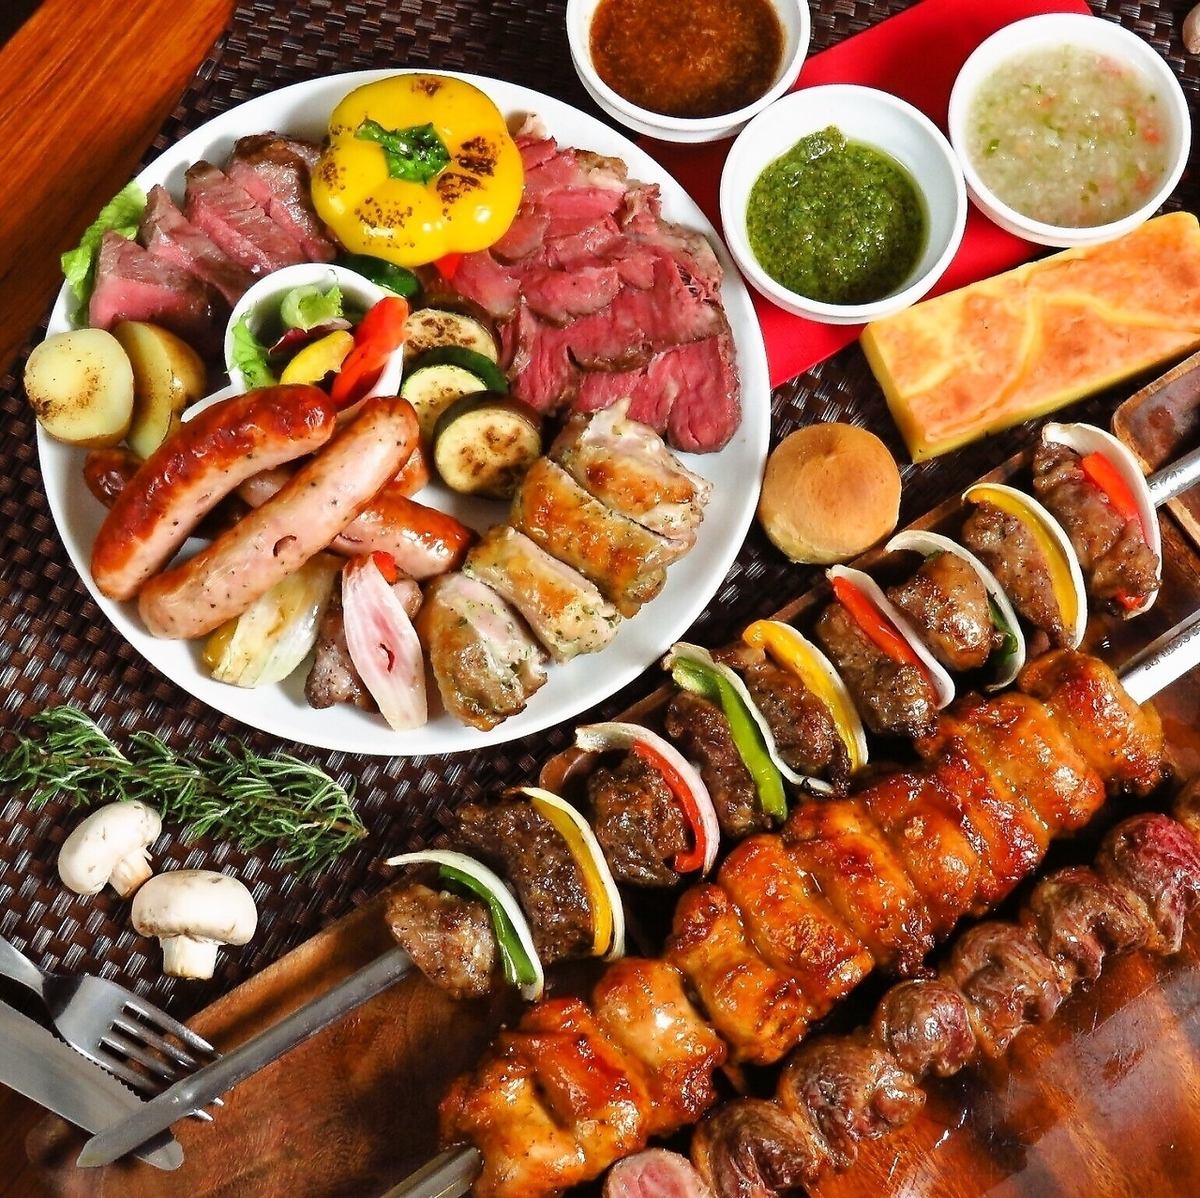 All-you-can-eat Brazilian BBQ Churrasco! All-you-can-drink from 4 types of barrels!